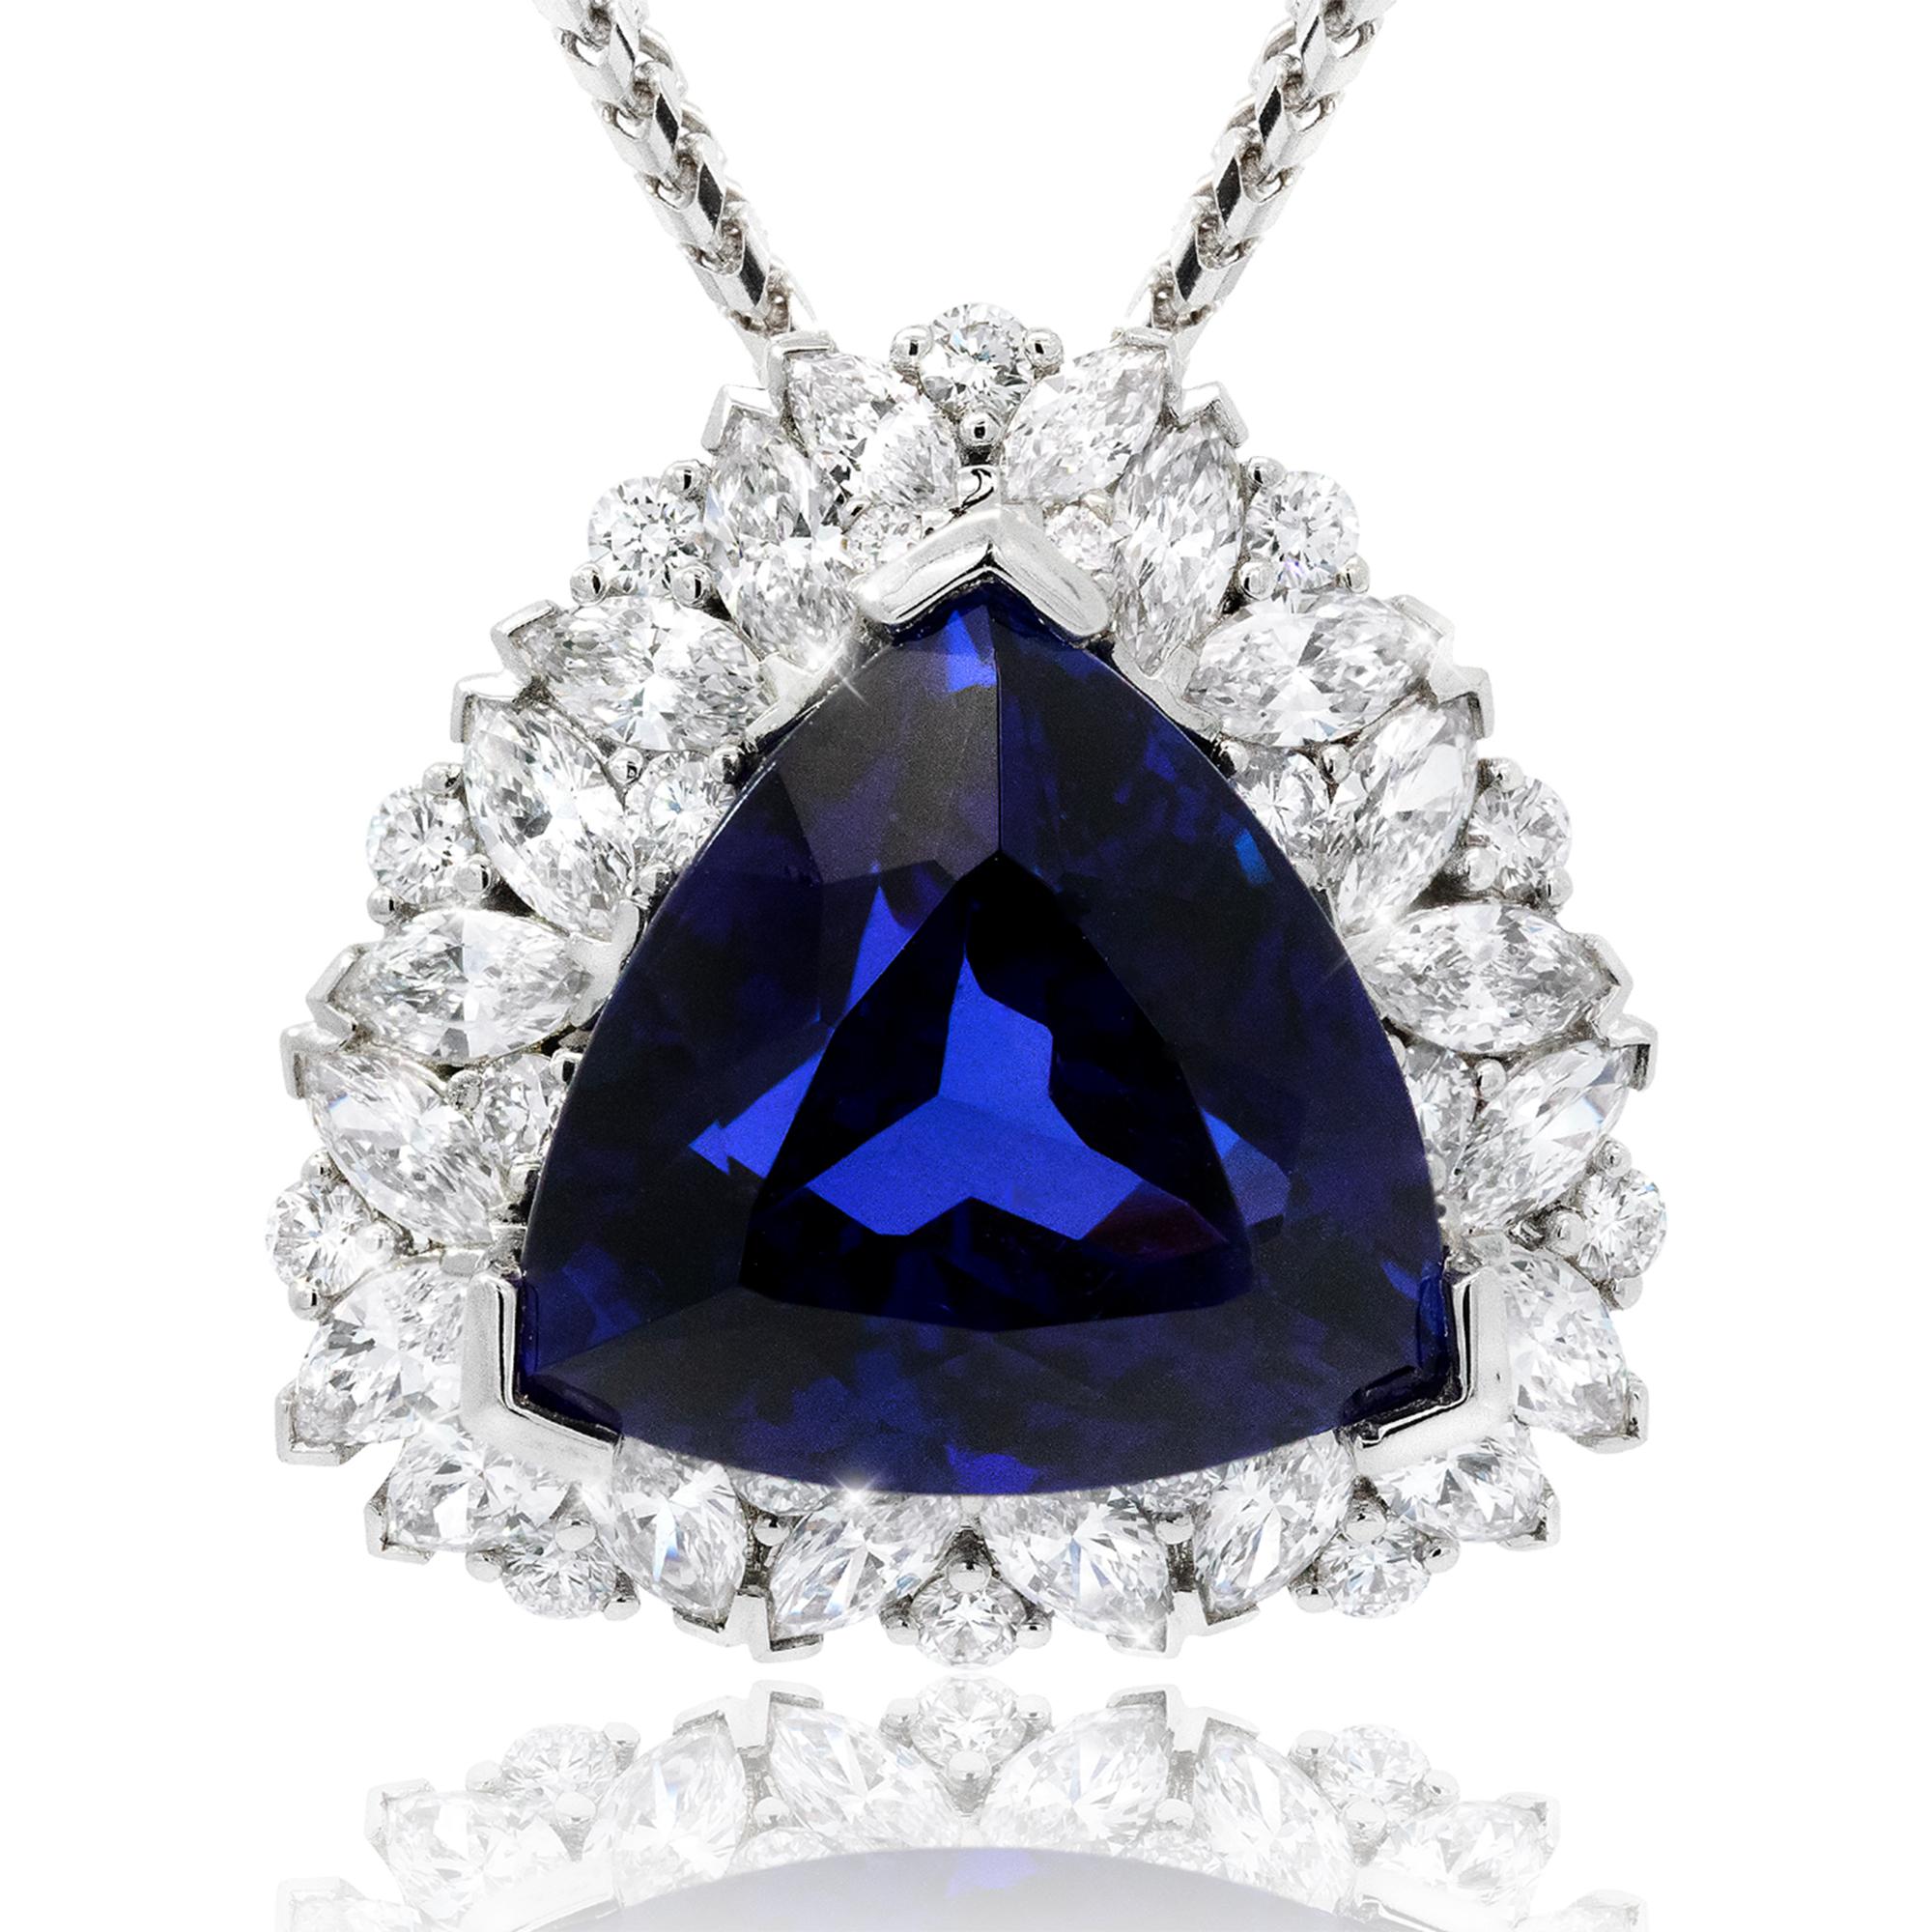 Deepest blue, deep from the Earth. An homage to the union between land and sky, the bold and the blue, under a crown of sparkling cloud, Kilimanjaro showcases the essence and rarity of tanzanite gemstones. 

A symbol of vitality, intuition, and new